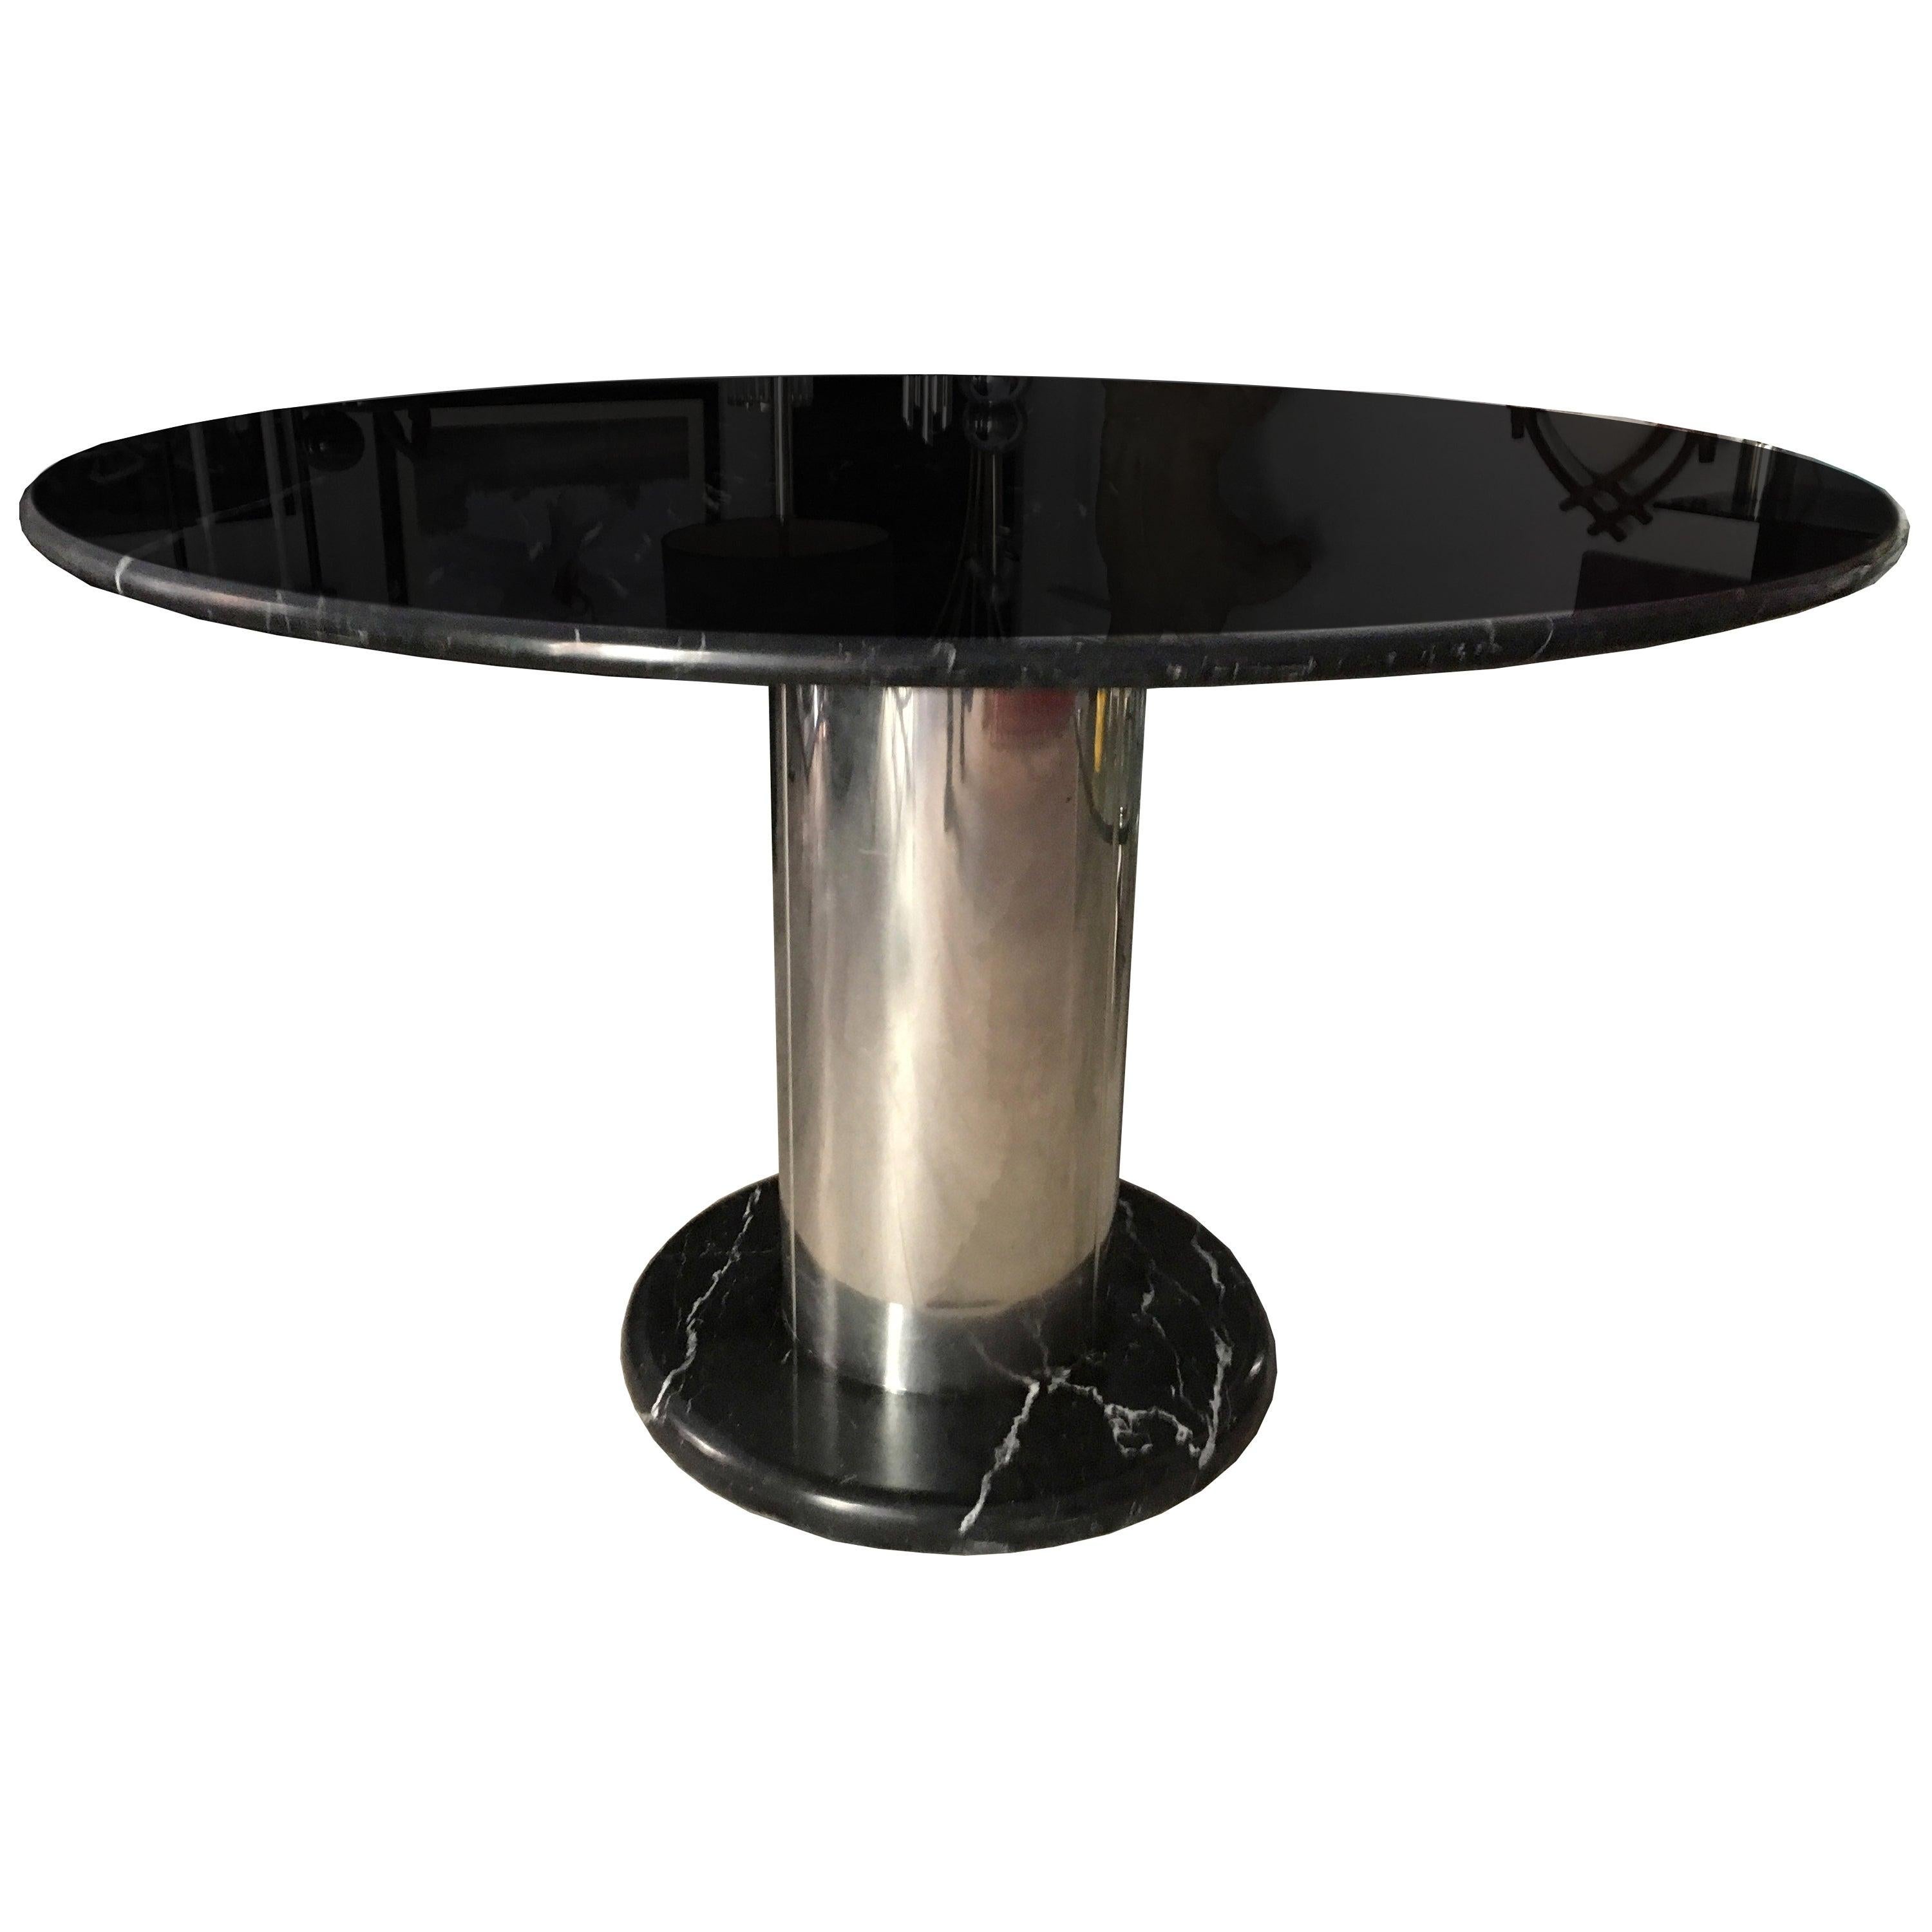 Sottsass Black Marble and Chrome Steel "Super Loto" Italian Table